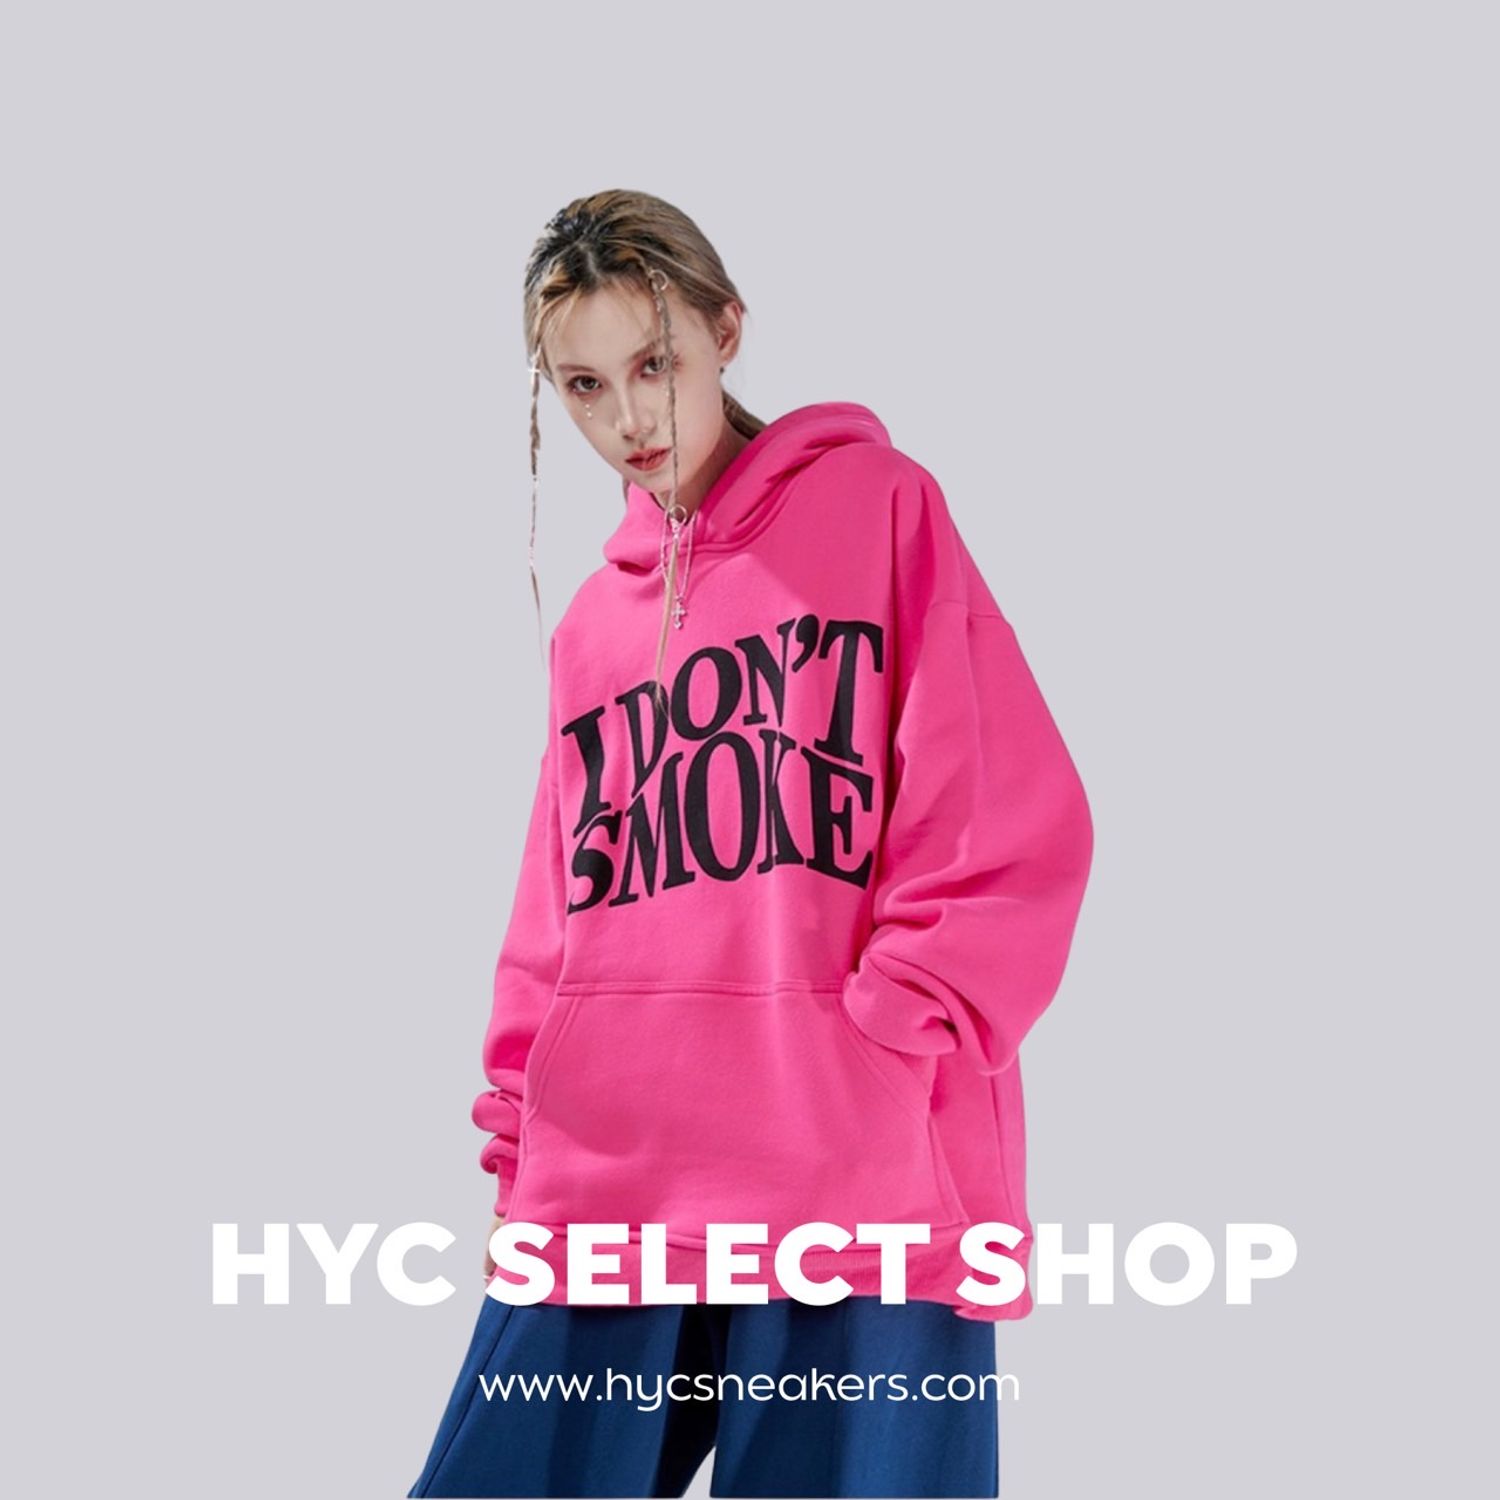 HYC Sneakers Online Store - I DONT SMOKE